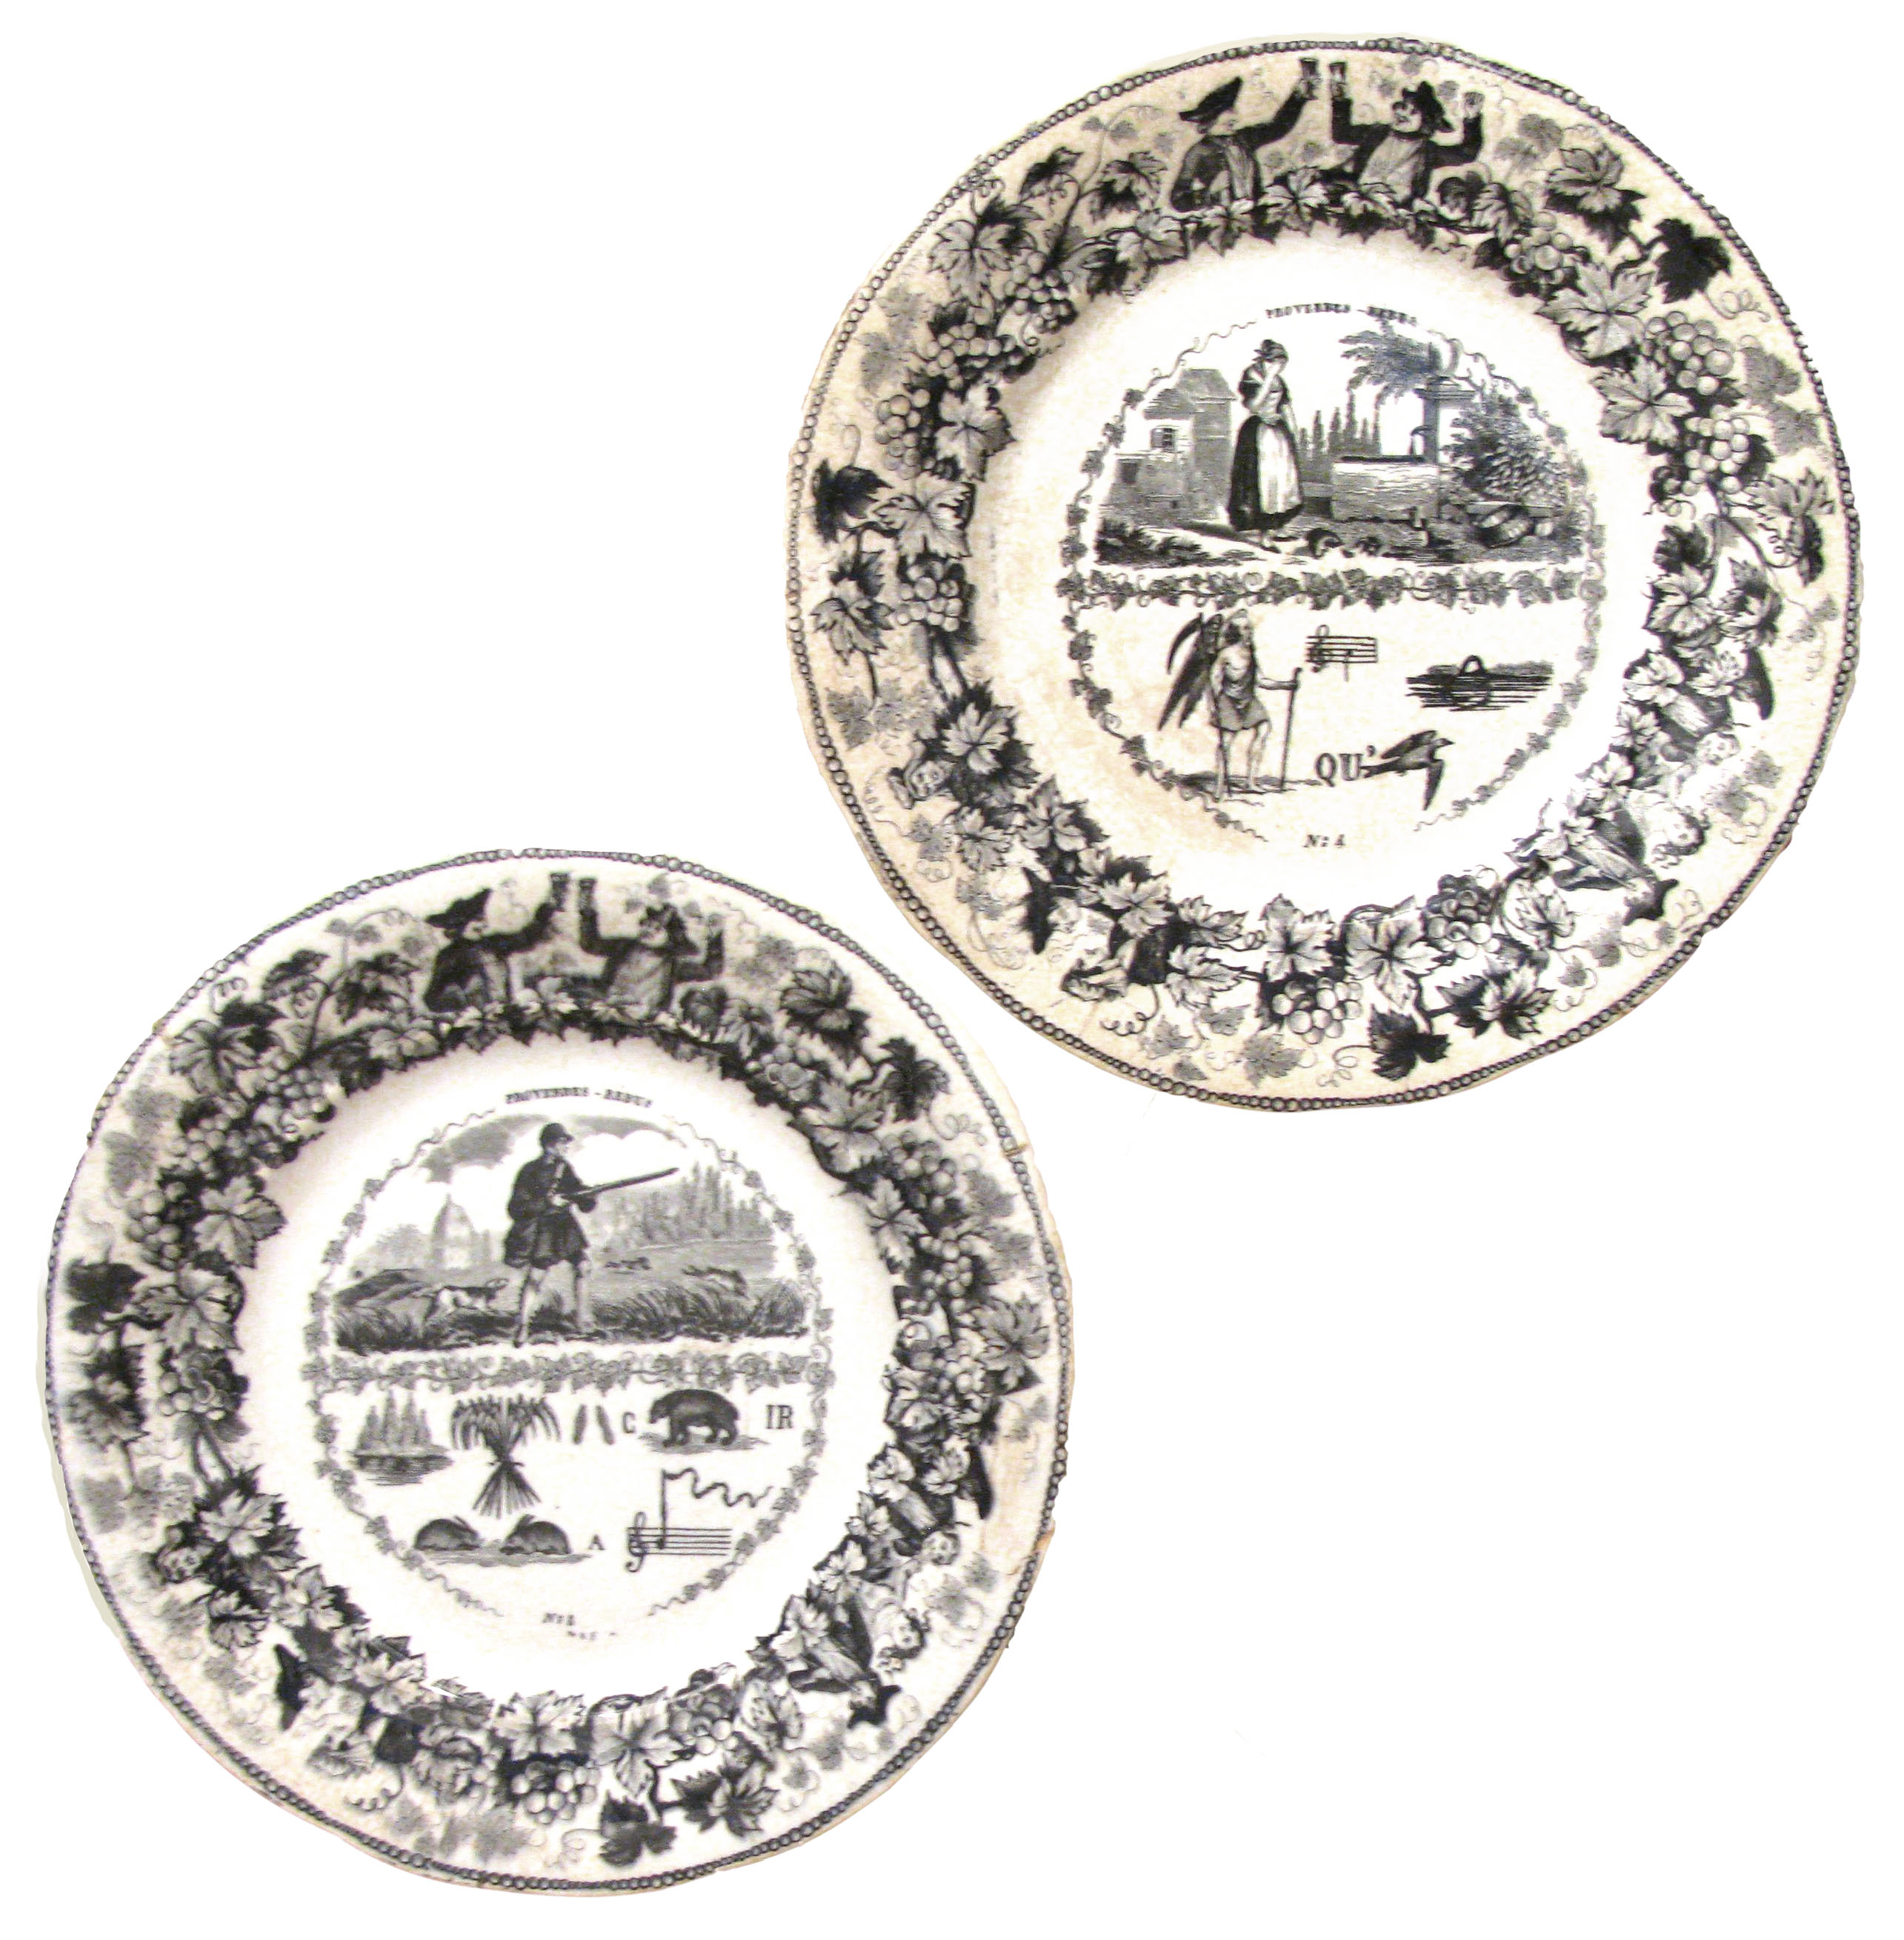 Antique French Rebus / Riddle Plate Pair~P77677743